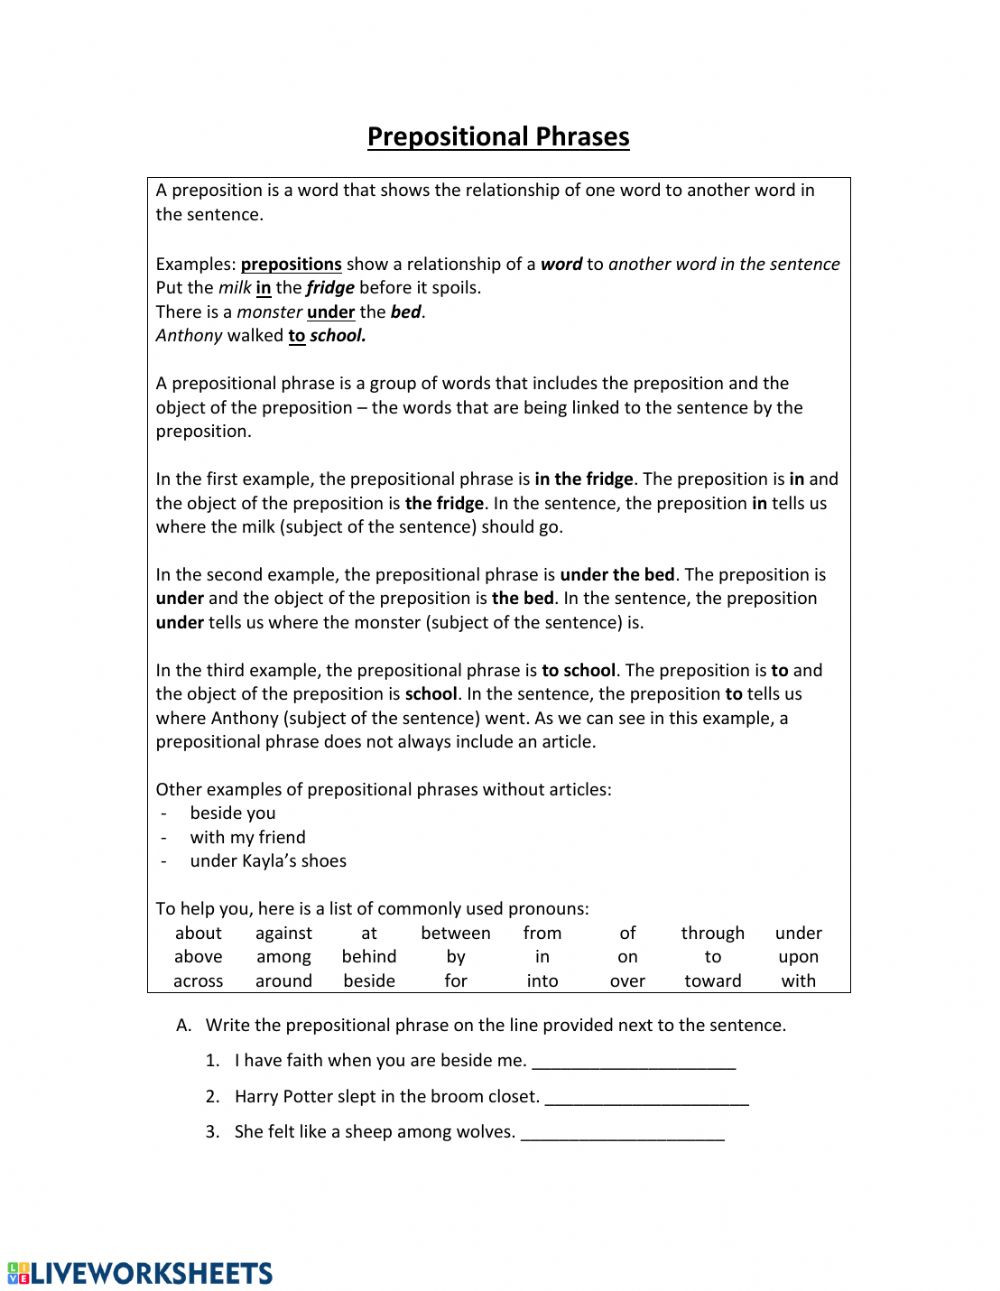 Prepositional Phrase Worksheet with Answers Prepositional Phrases Worksheet